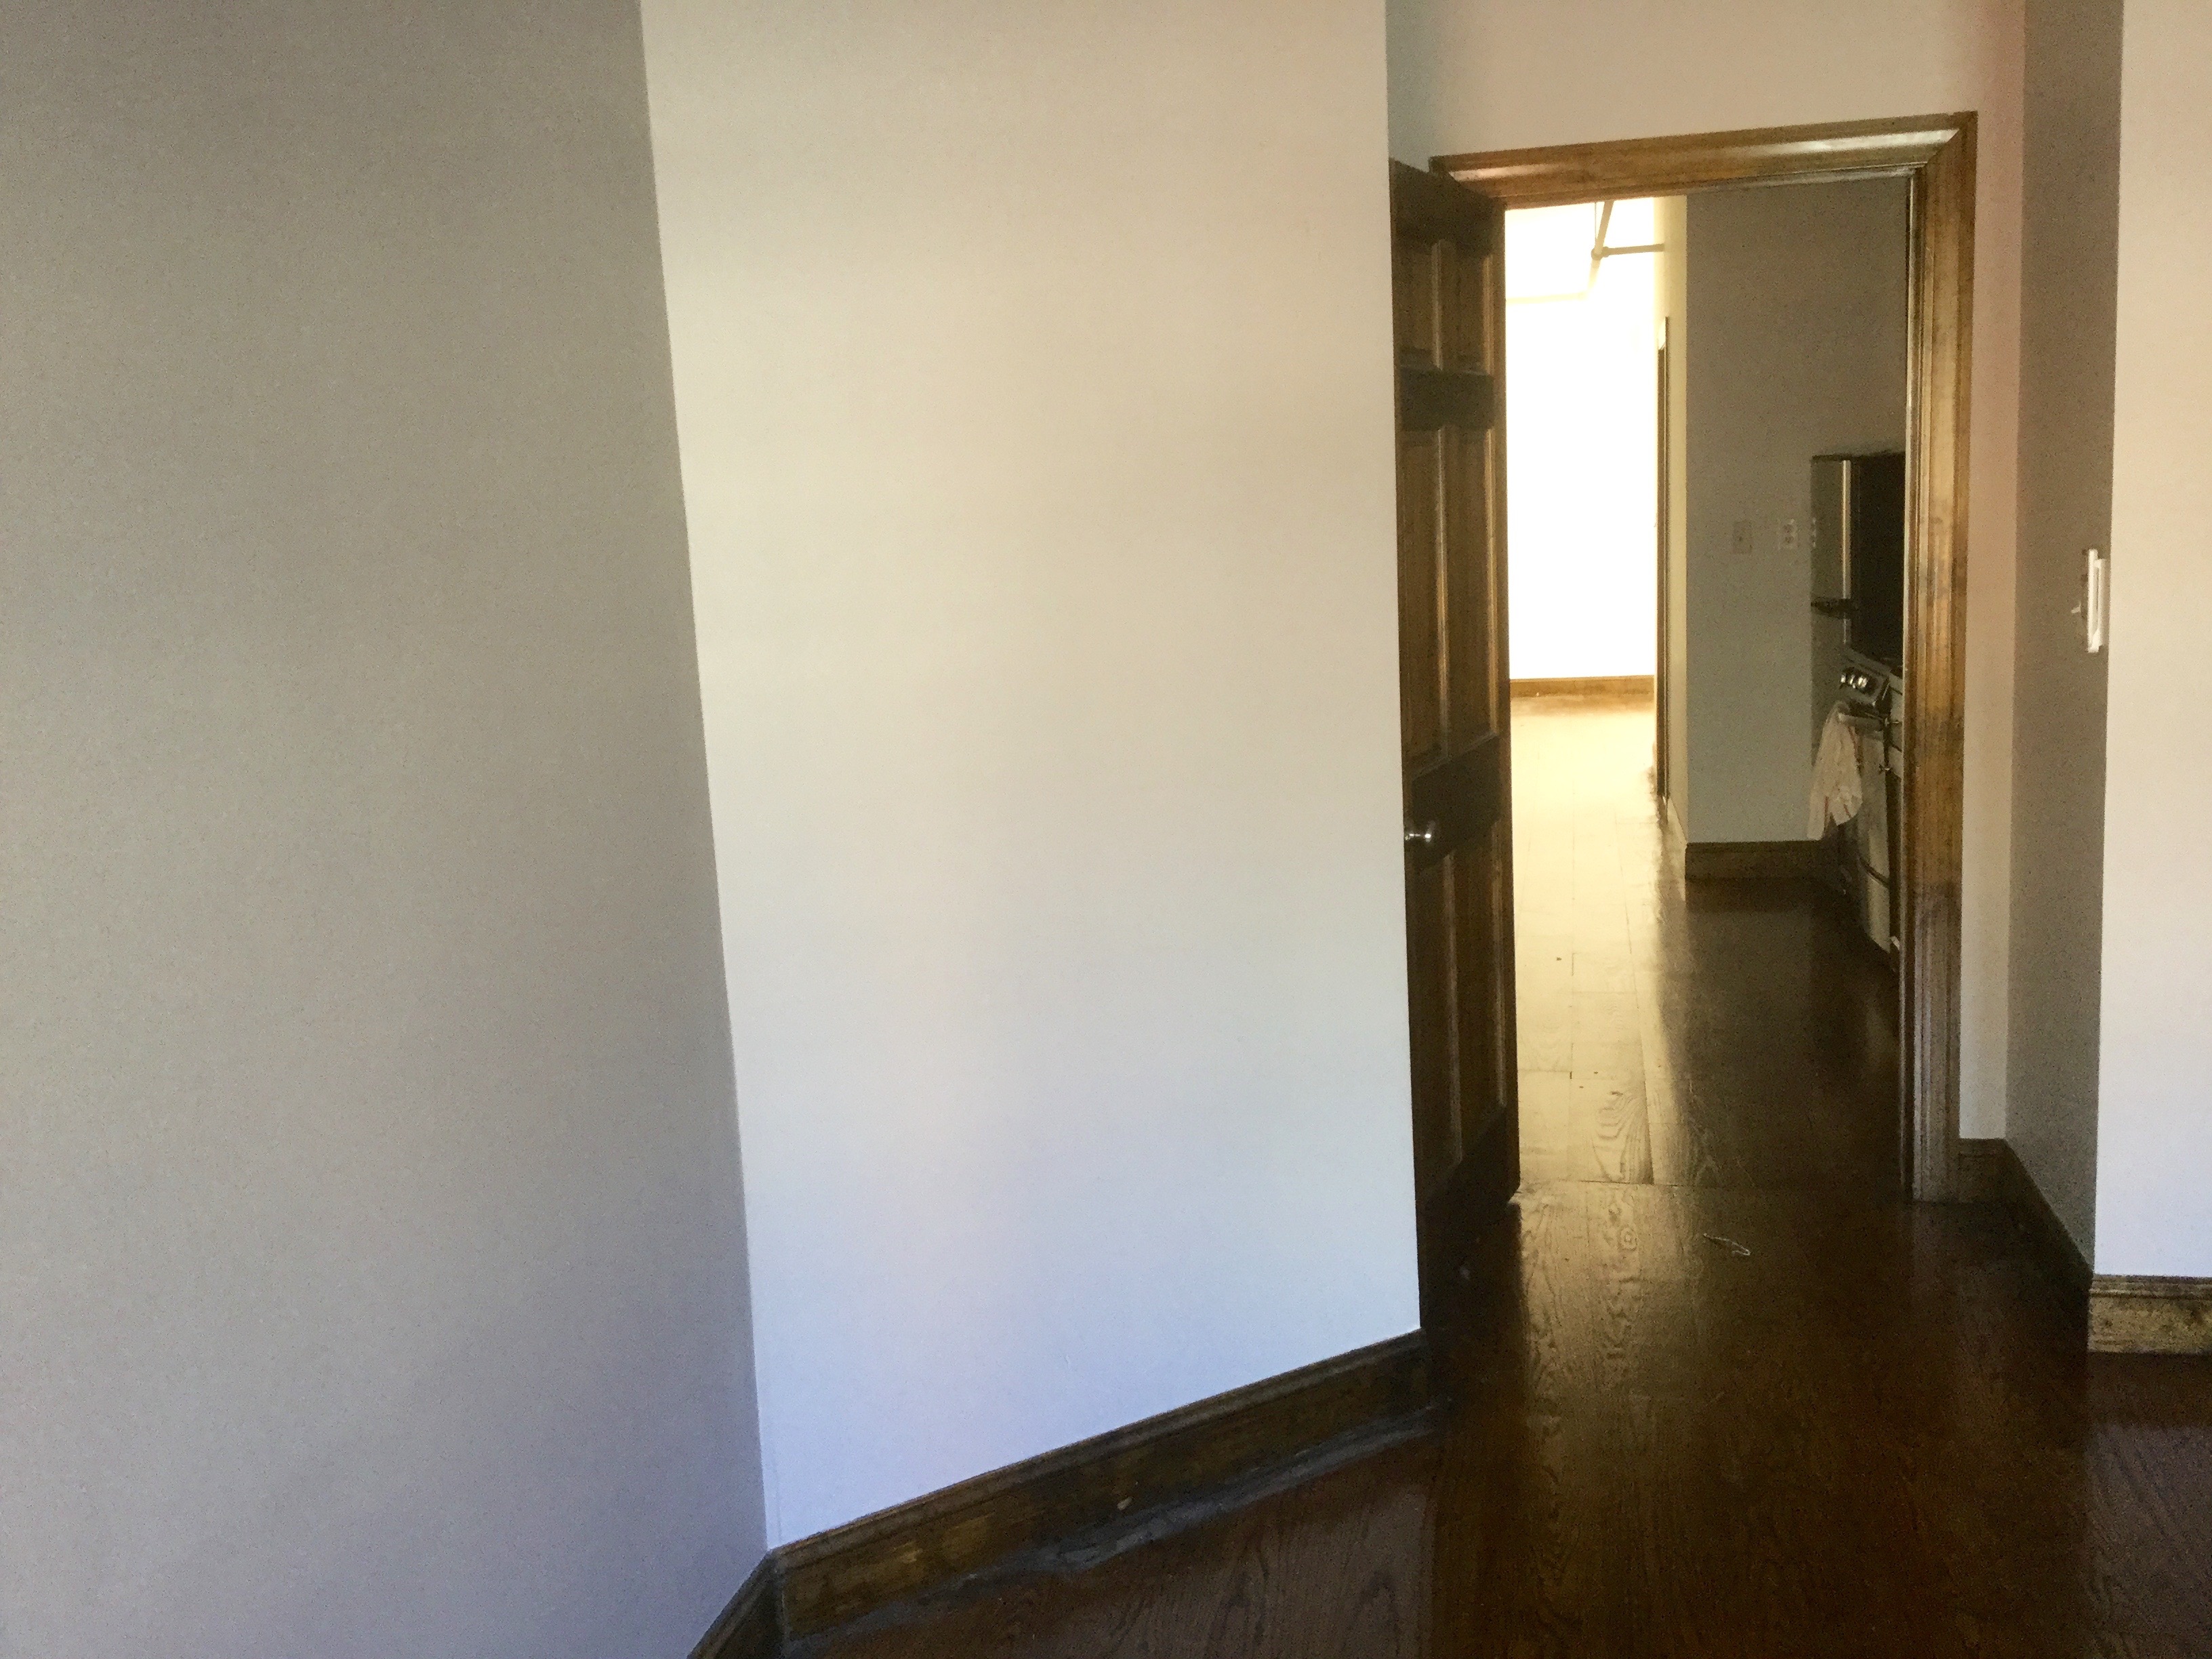 NEW! JUST LISTED! W53rd St 1 Bedroom APT For Rent ! Bring you ...